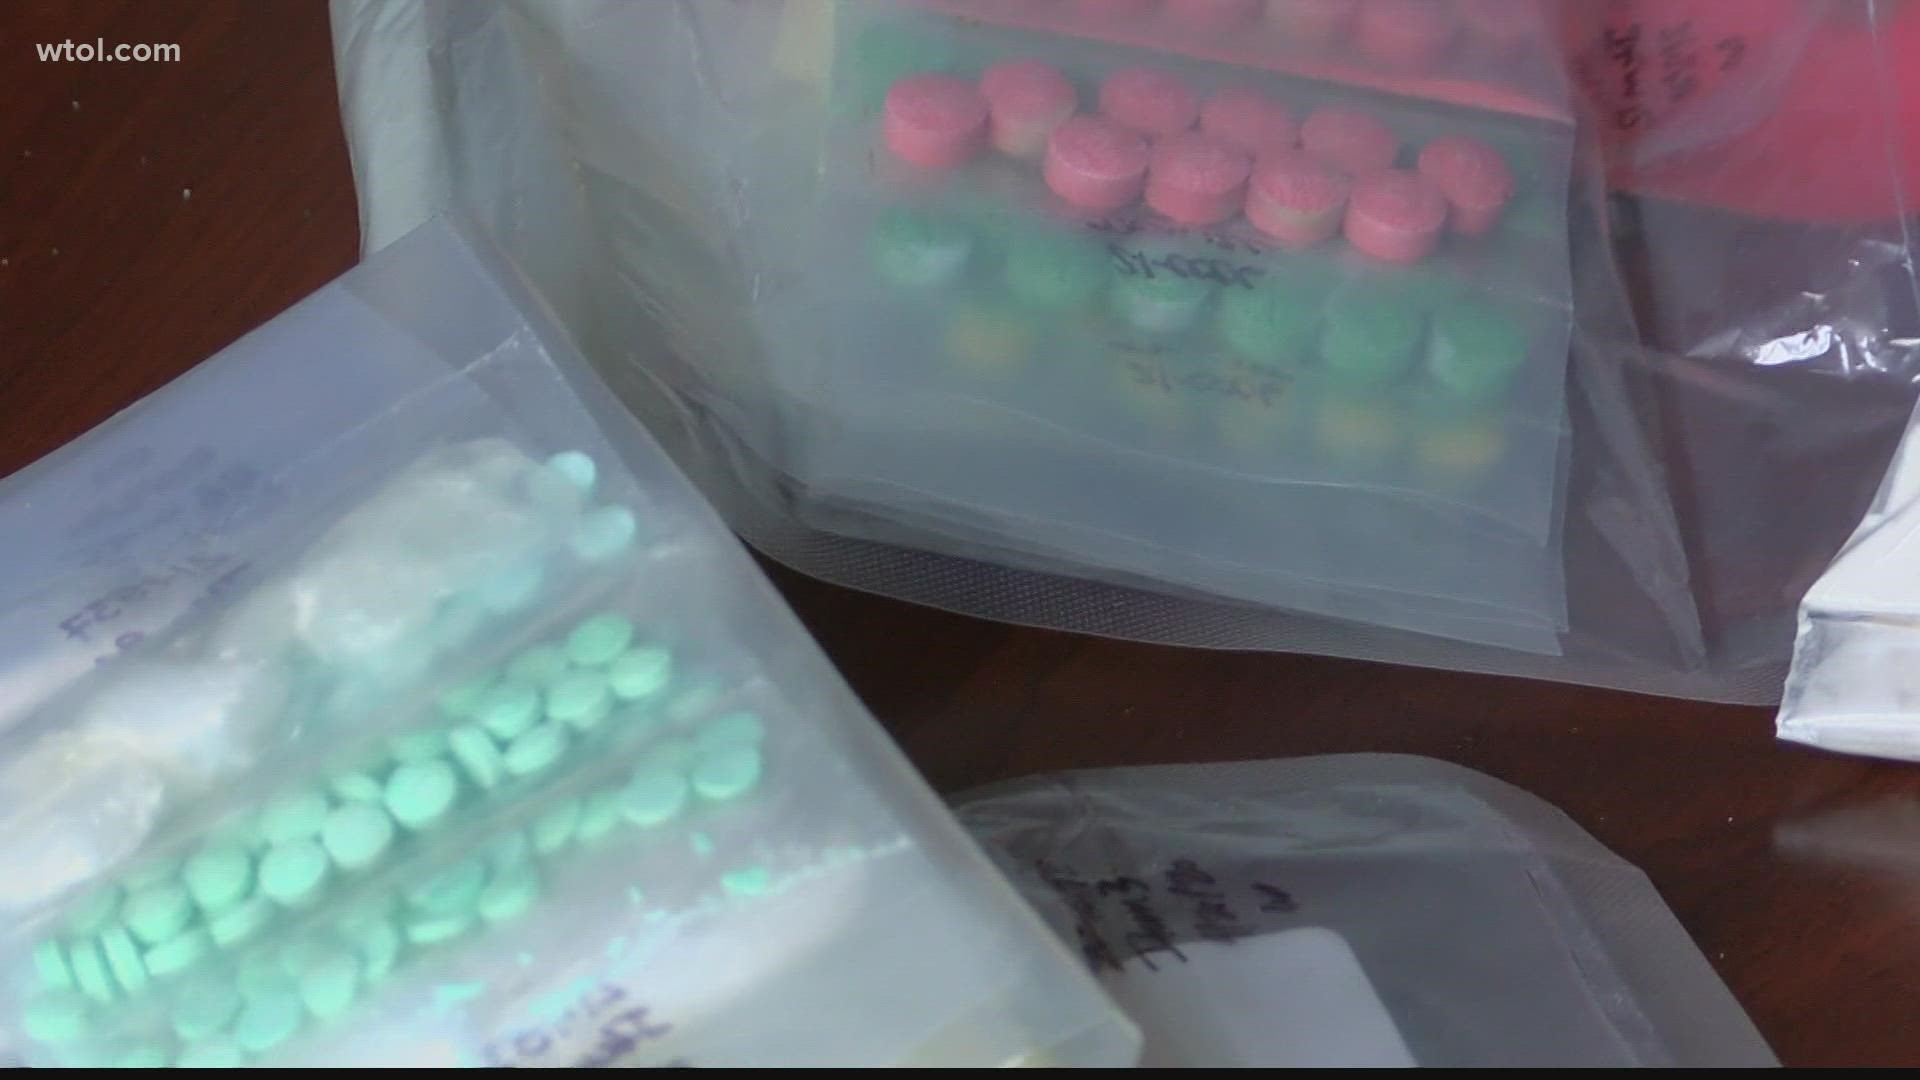 There's been a spike in fake prescription pills around the state of Ohio. An undercover Toledo police officer describes what the situation is like on our streets.